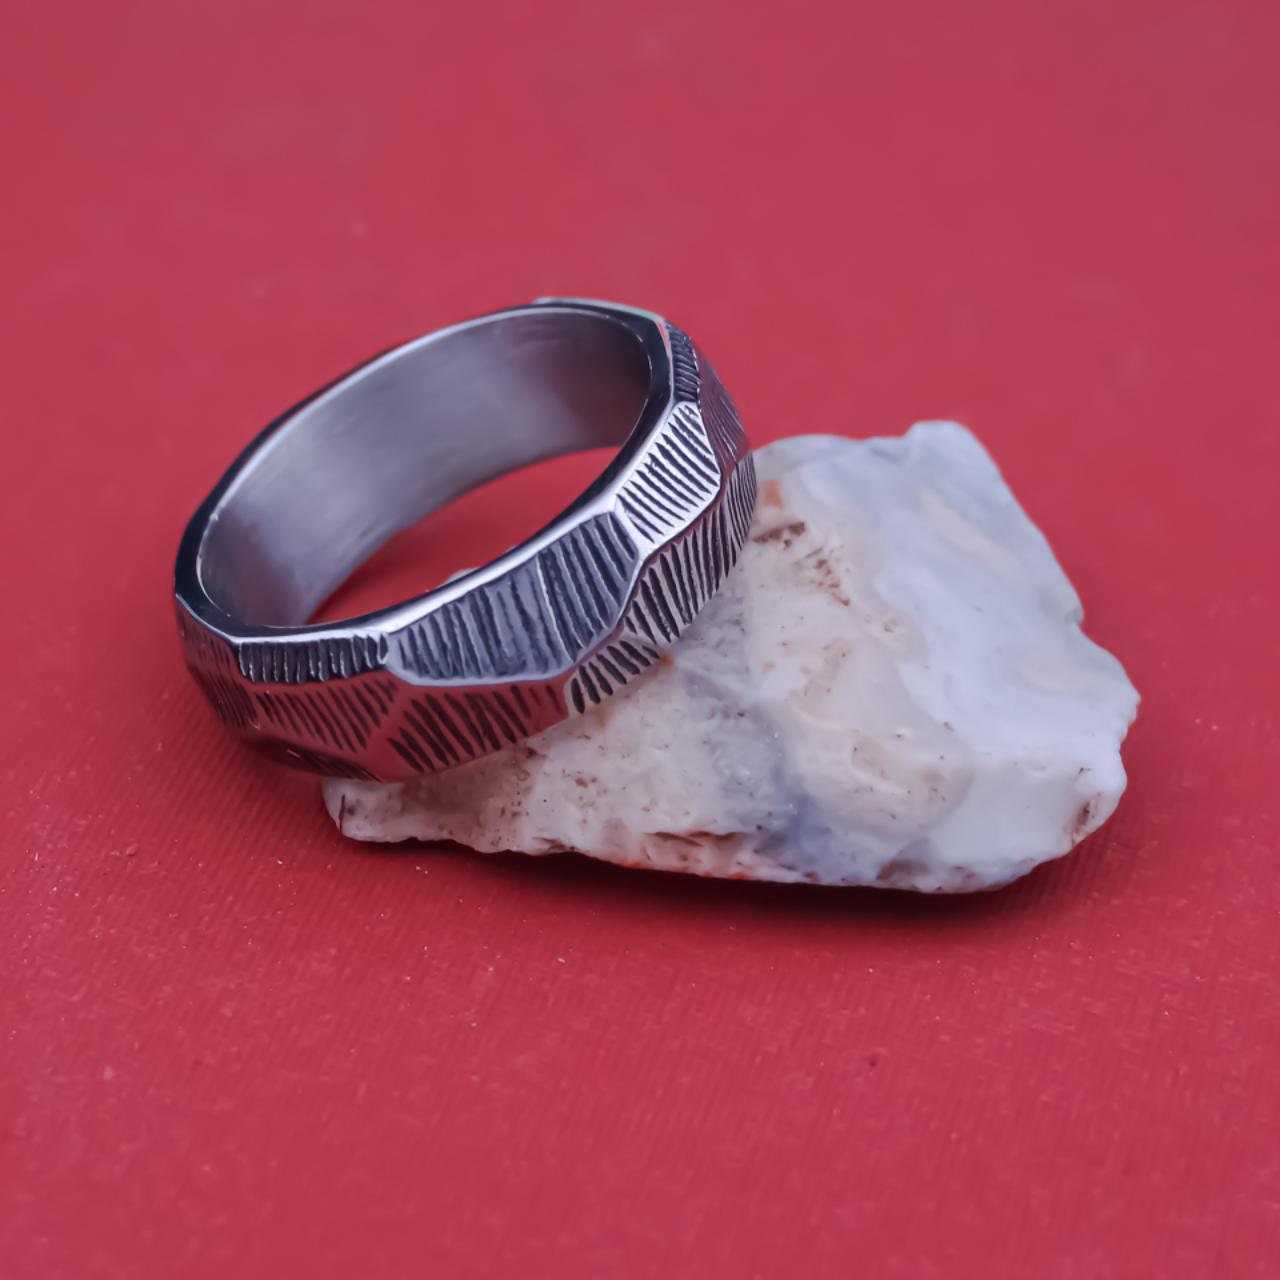 Oxidised Faceted Argentium Silver Viking Ring - Rough Hammered Textured Band - Mens/Ladies Sizes - Industrial Viking - Stainless steel ring